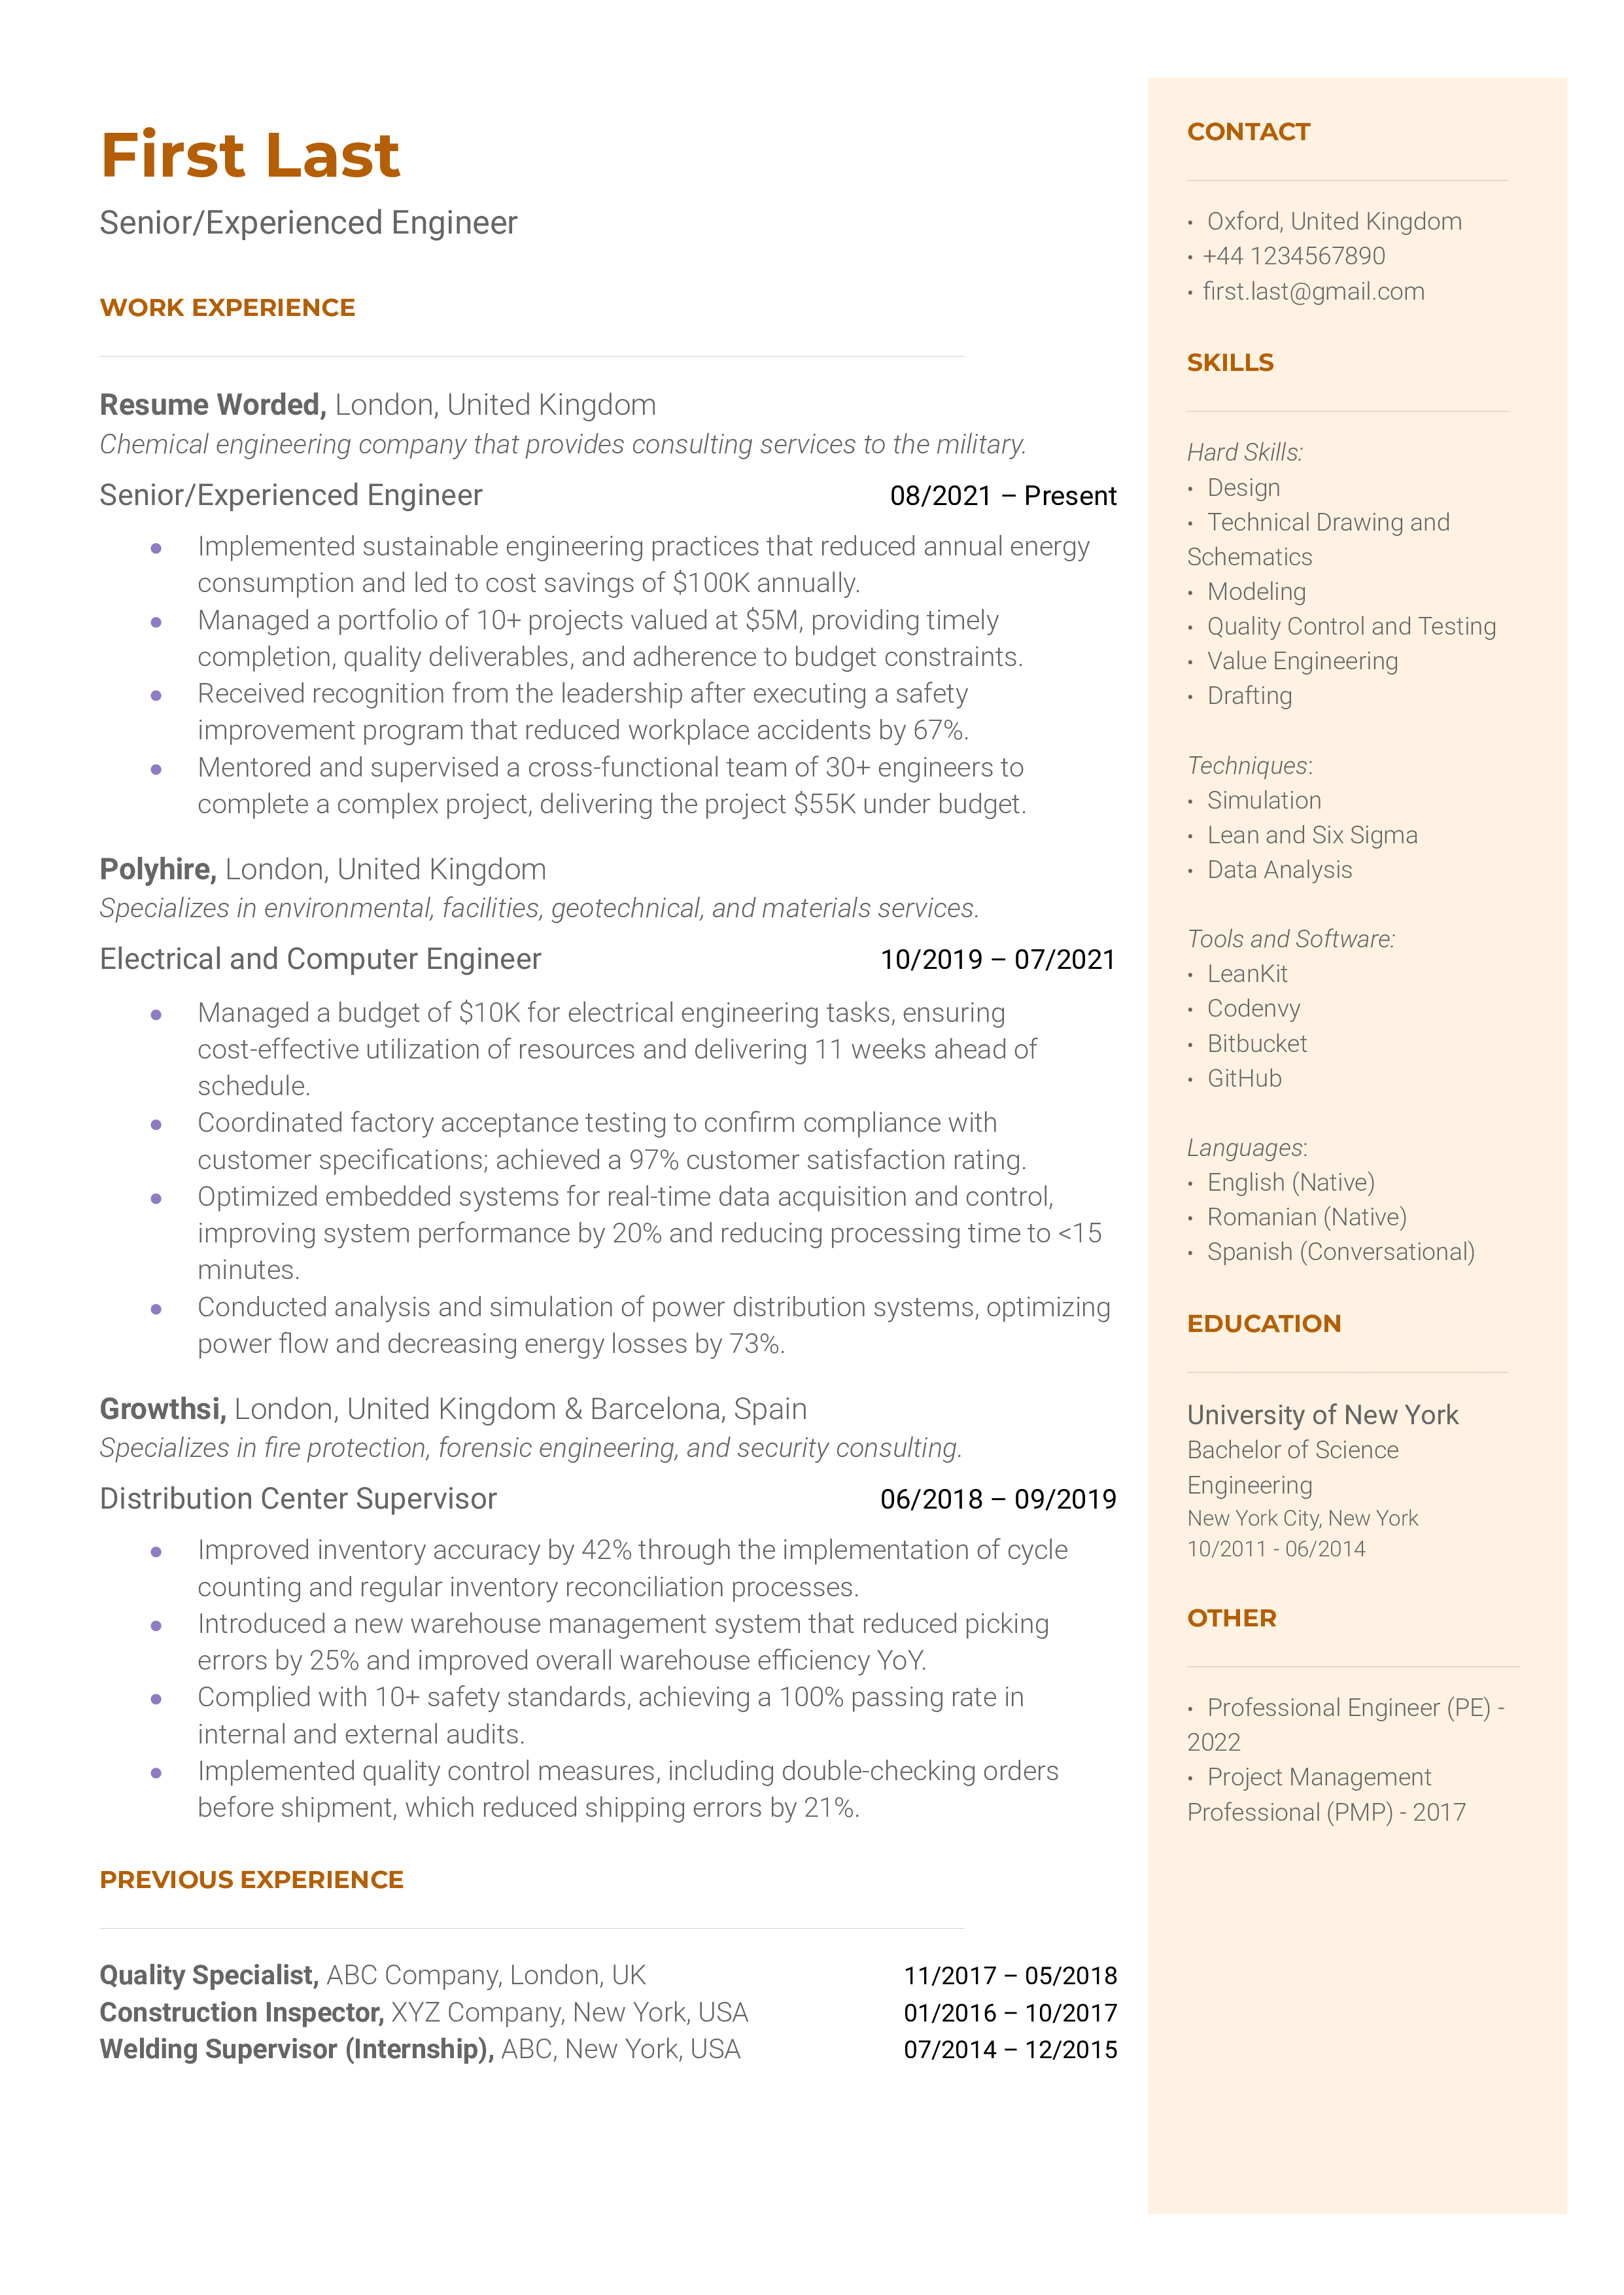 A well-structured CV of a seasoned engineer showcasing leadership and adaptability.